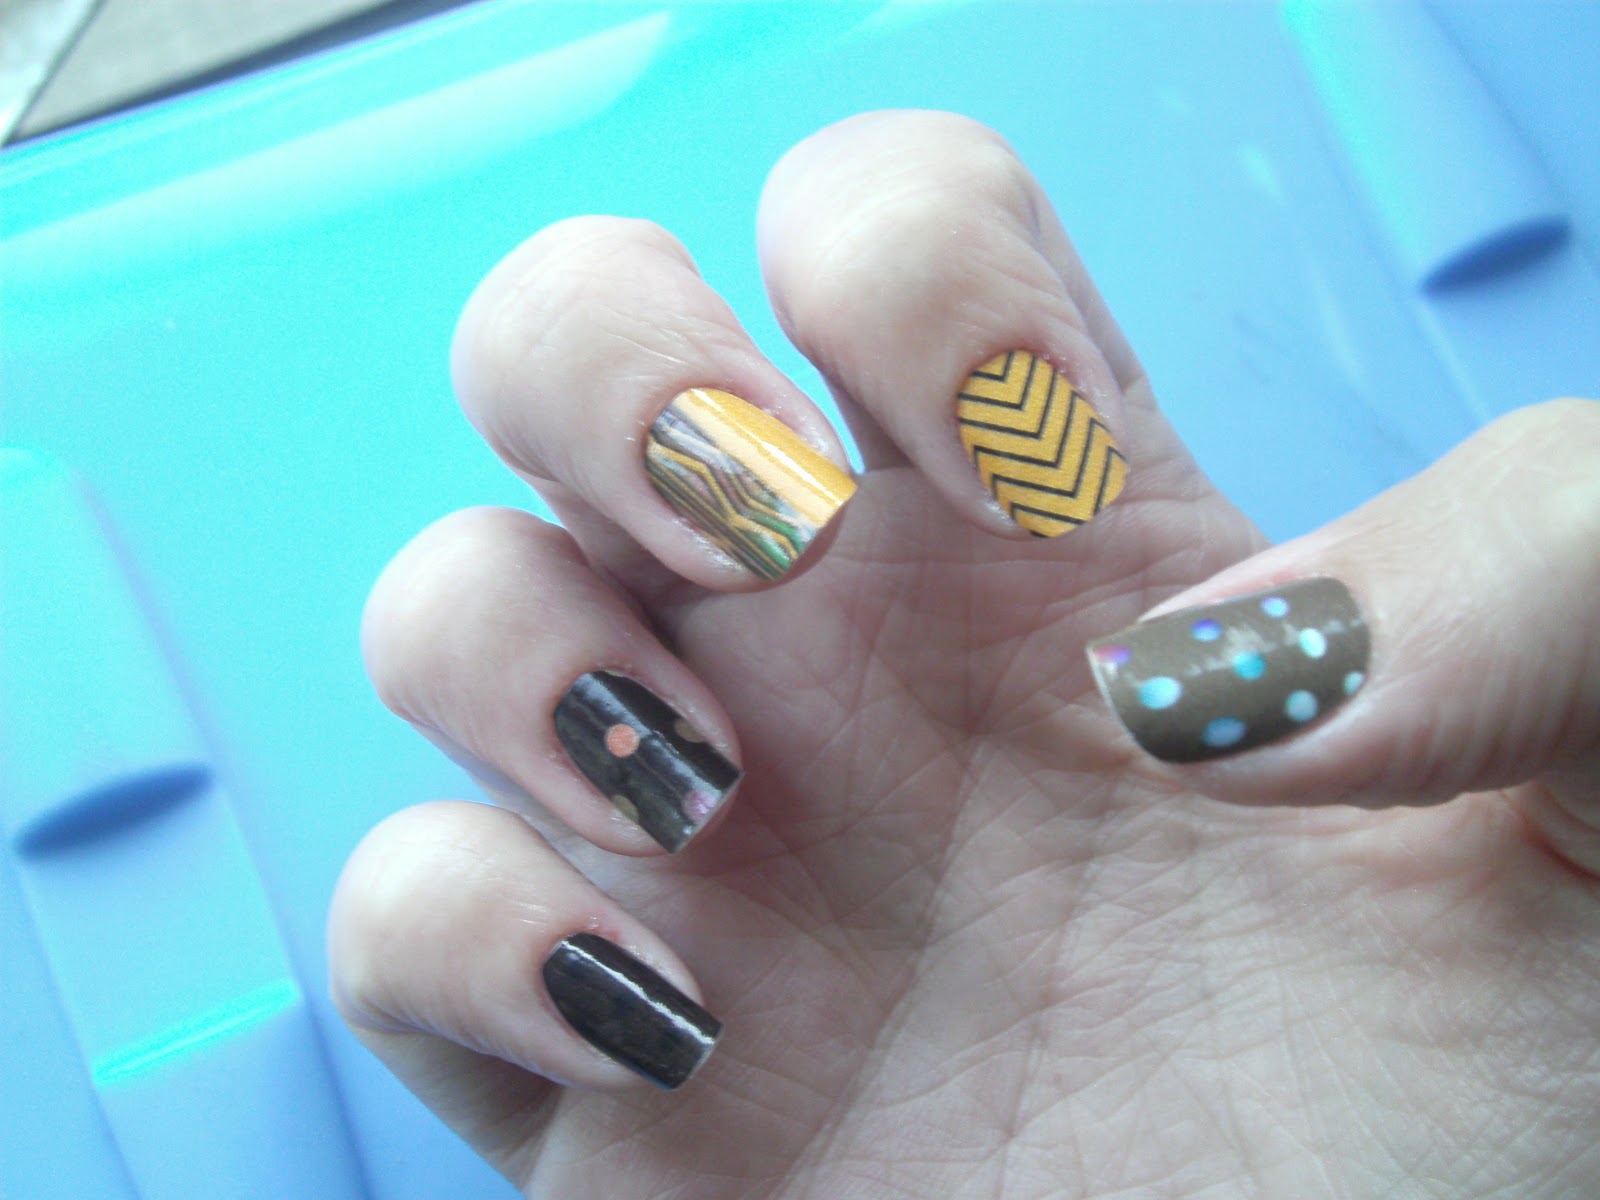 Just like I loved the bling factor of the Nail Rock wraps, I love how these